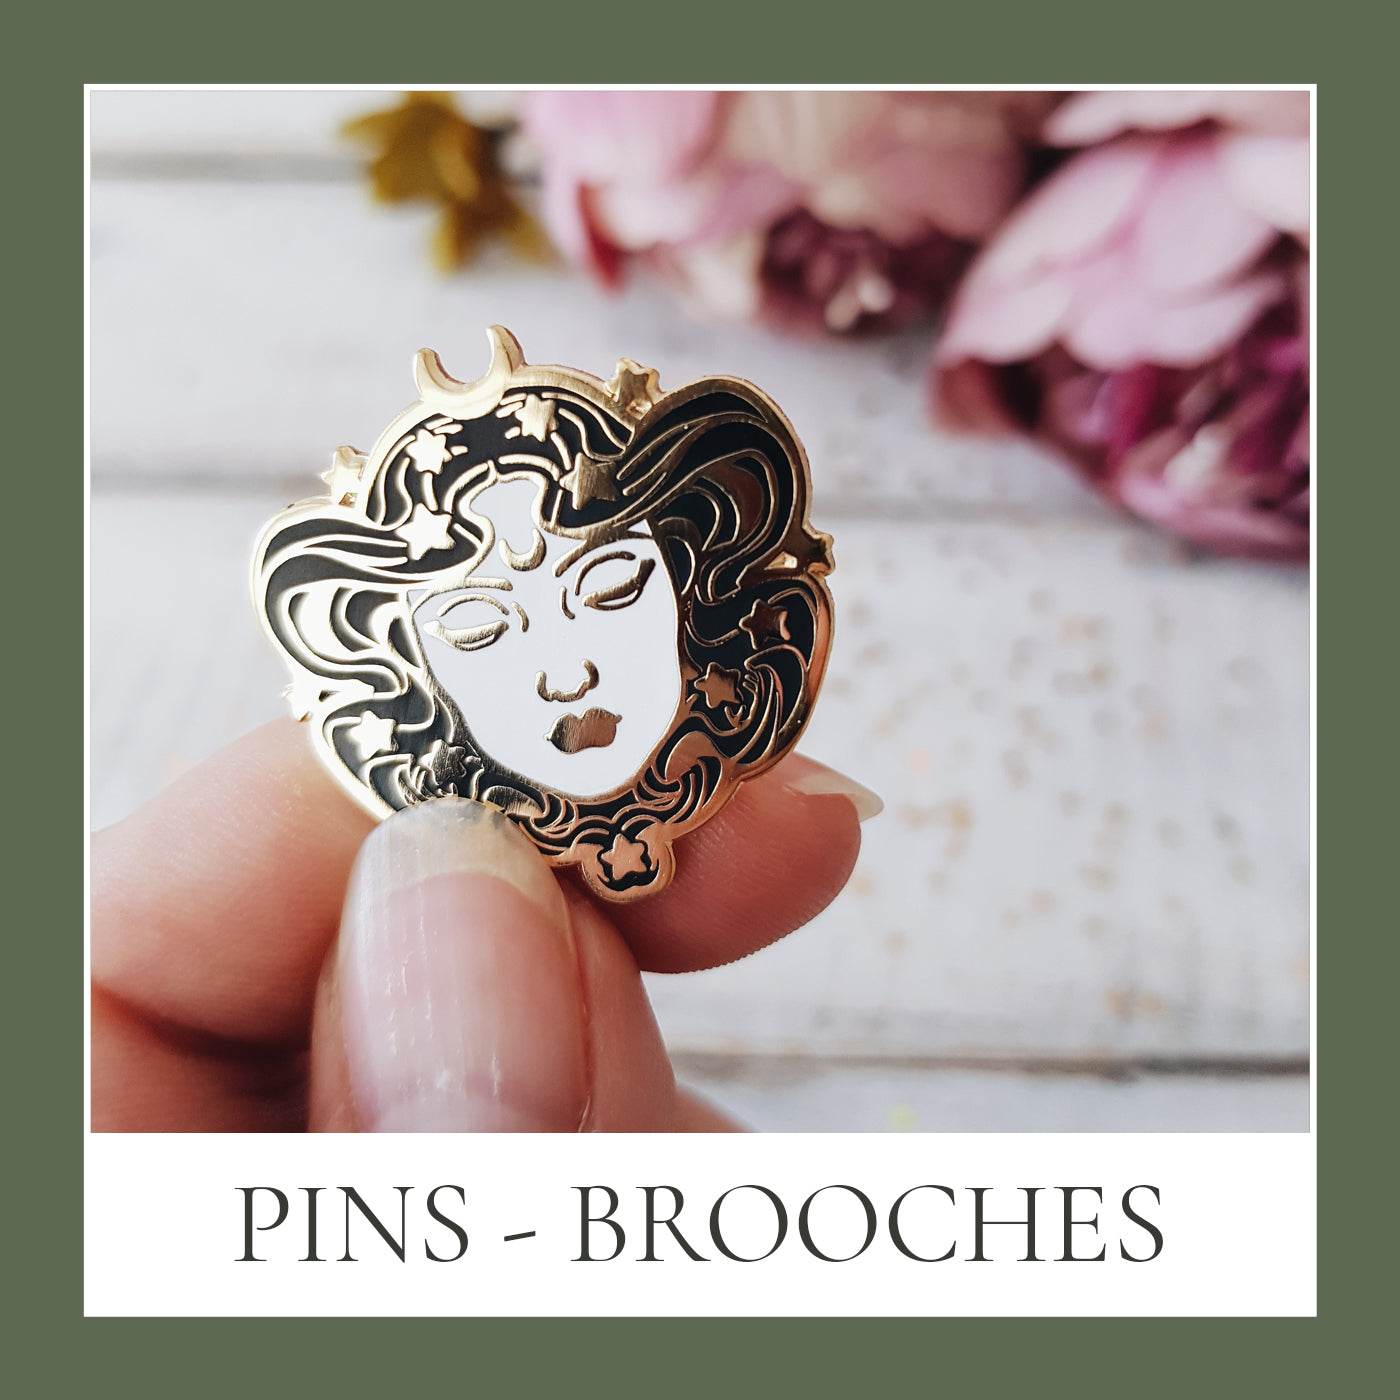 PINS, BROOCHES, PATCHES